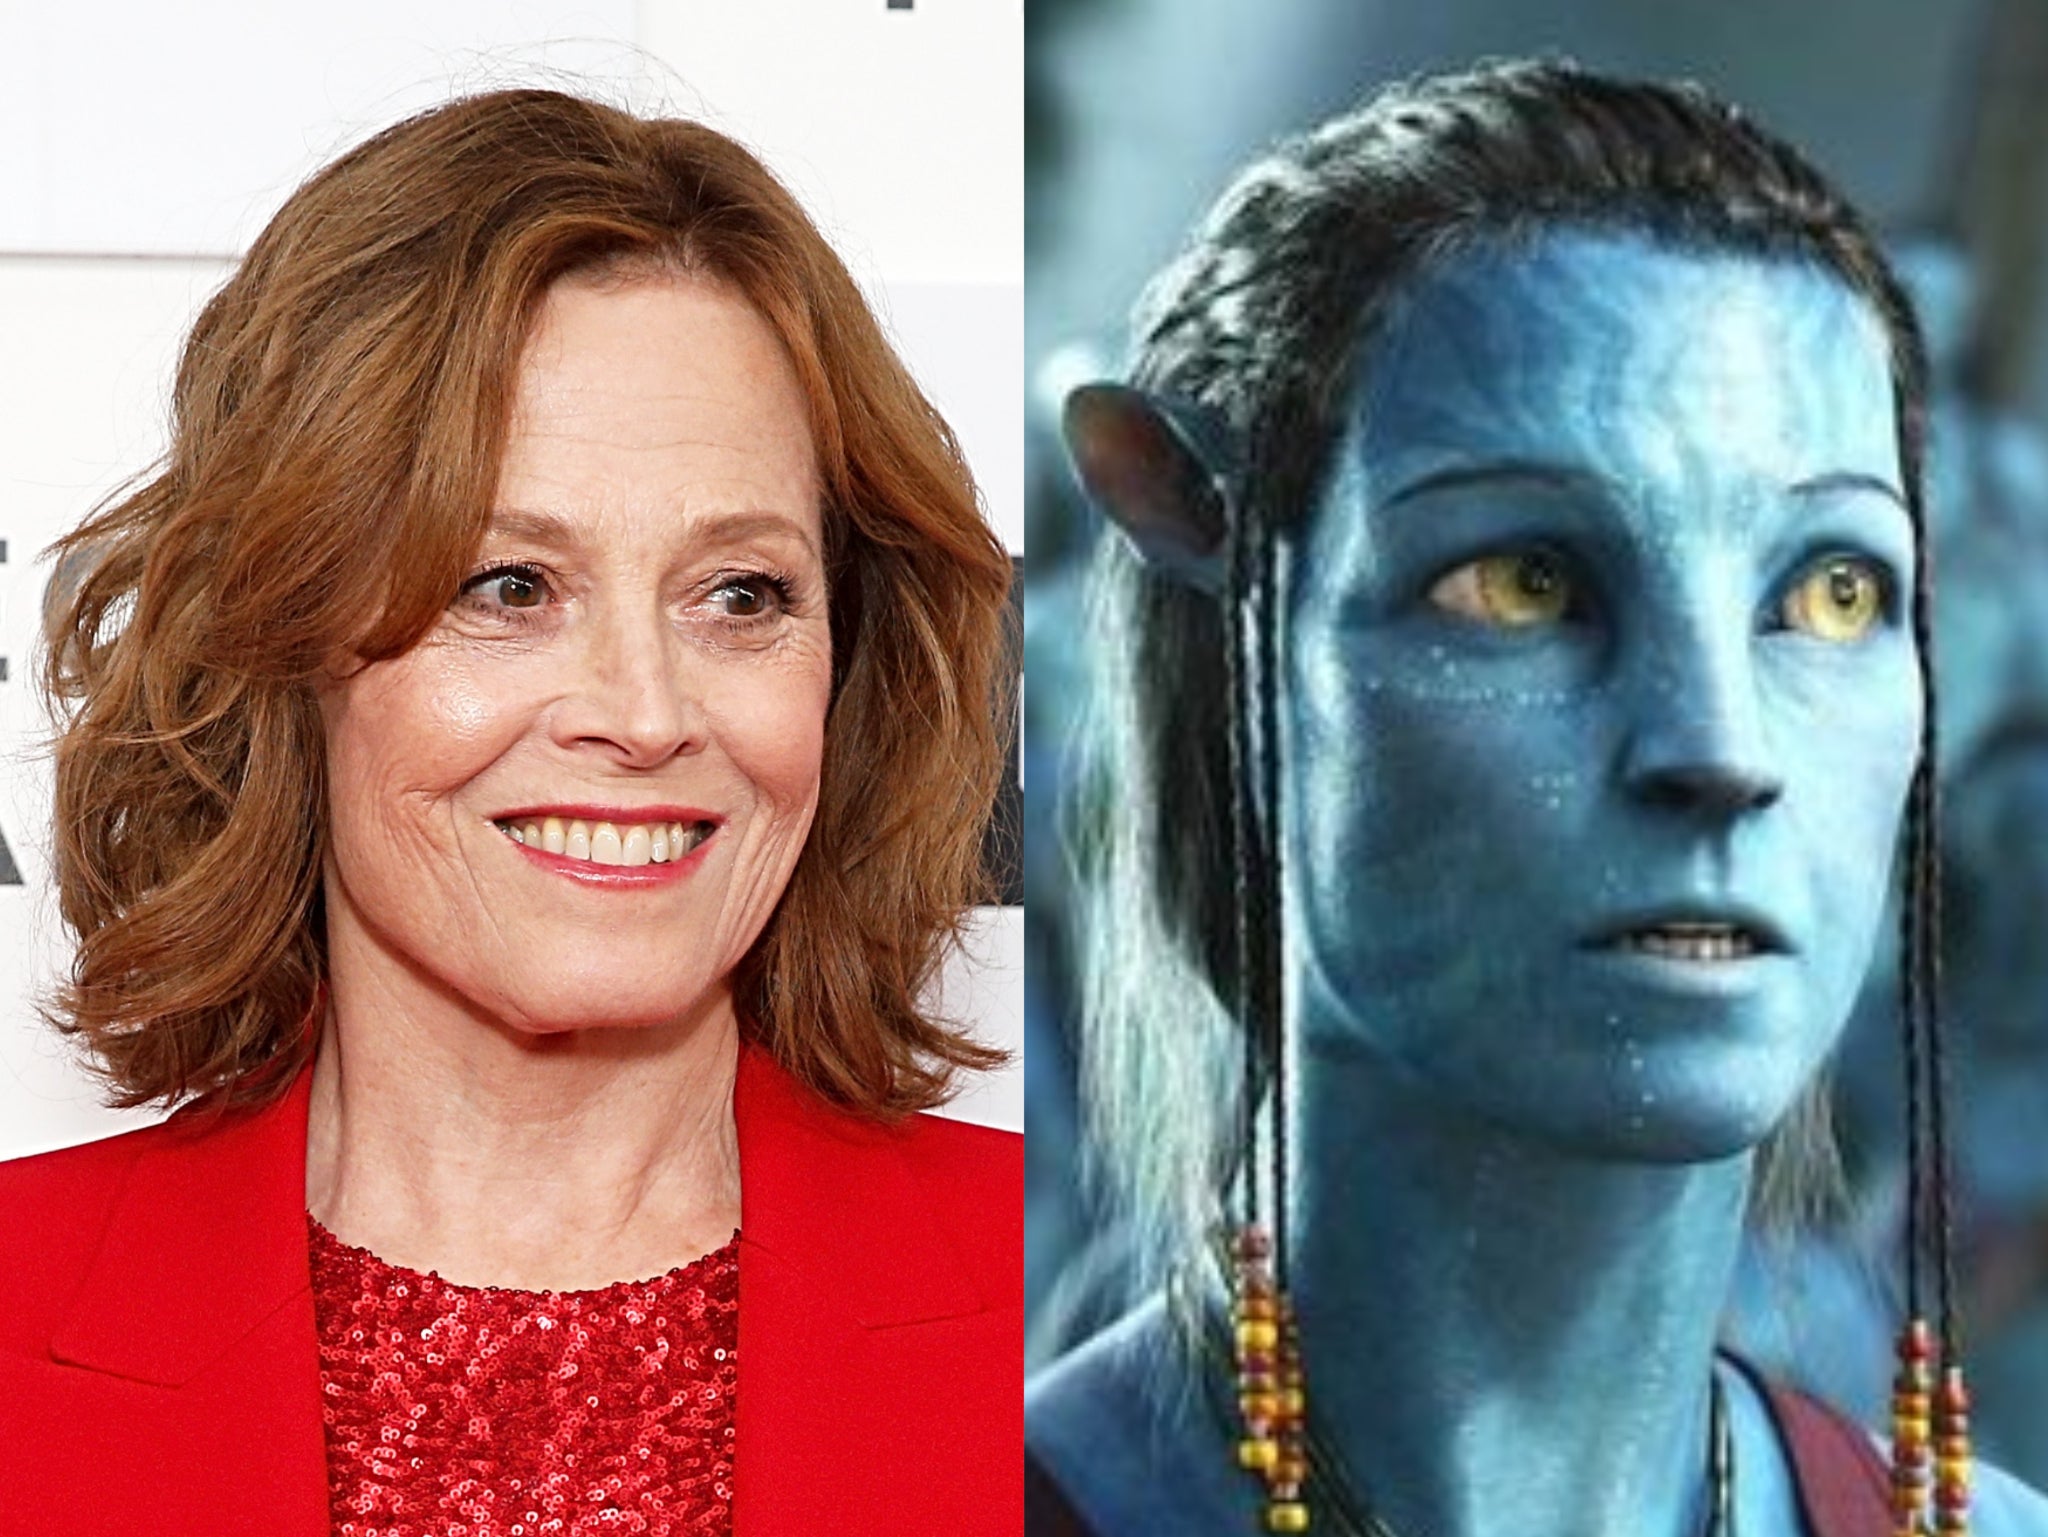 Avatar 2 Fans Cant Believe Who Sigourney Weaver Is Playing In New Movie The Way Of Water 4717